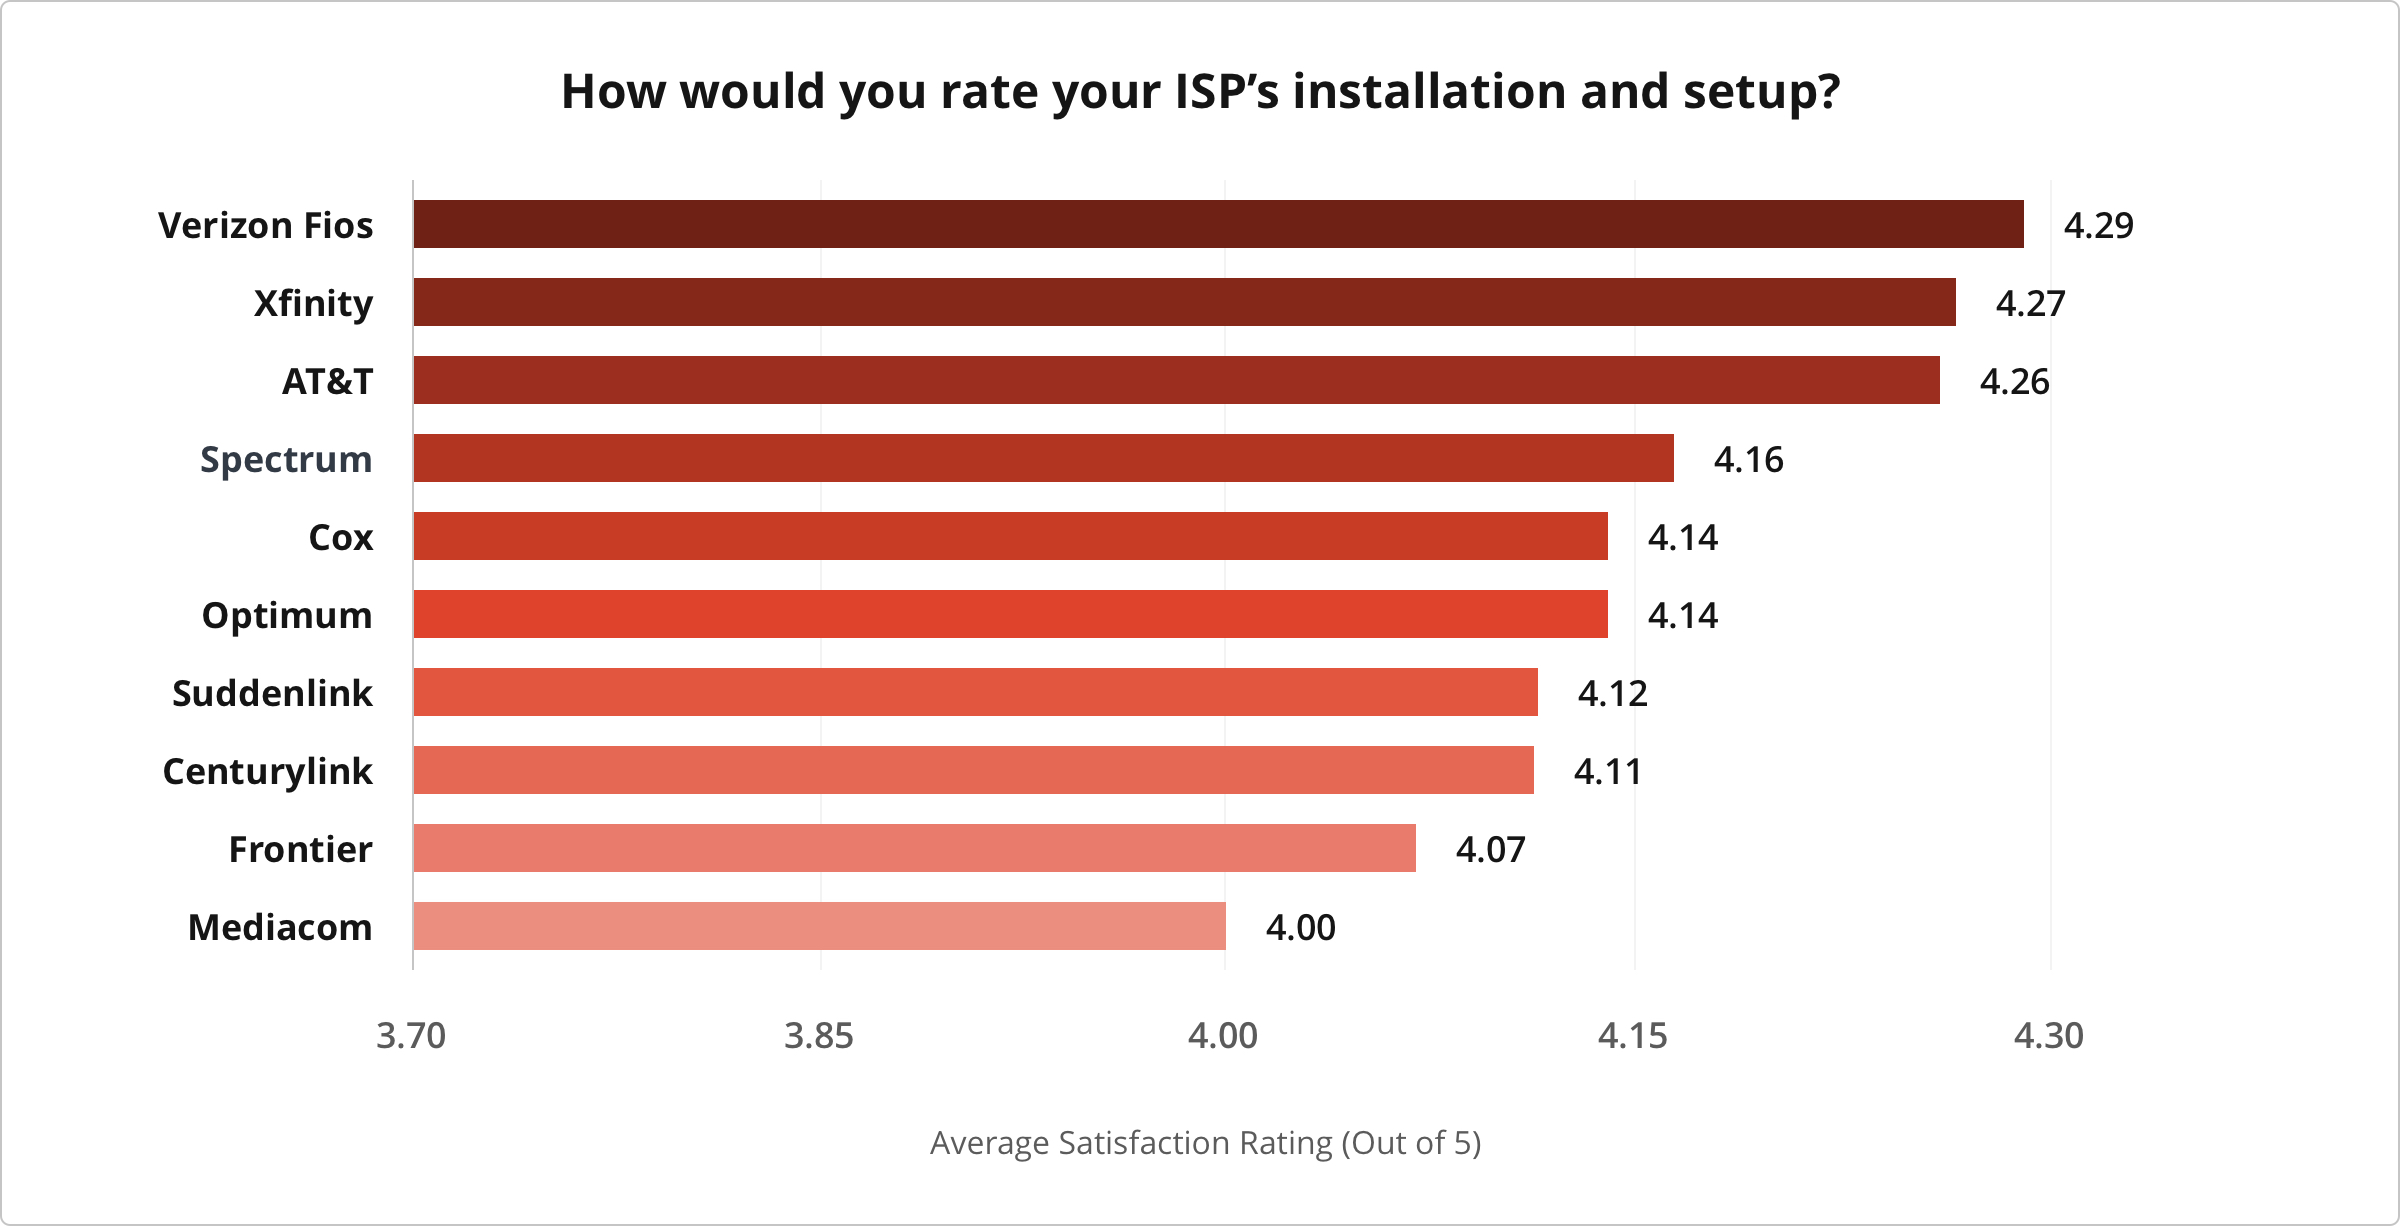 Graph showing how users would rate their ISP installation and setup from 1 to 5